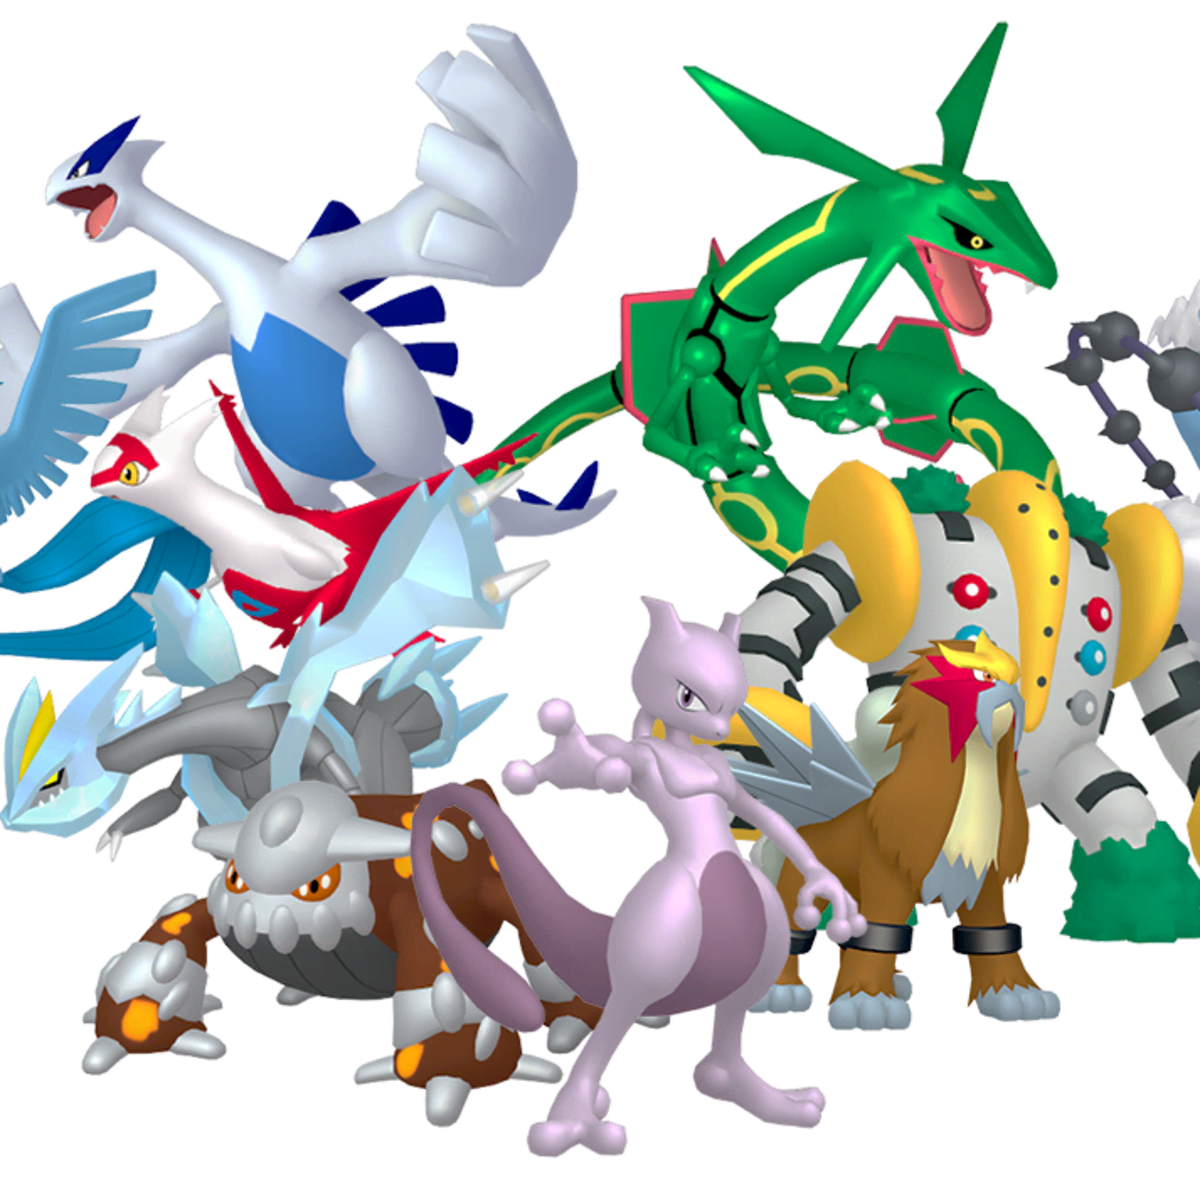 Top 10 most powerful Pokemon Mega Evolutions of all time